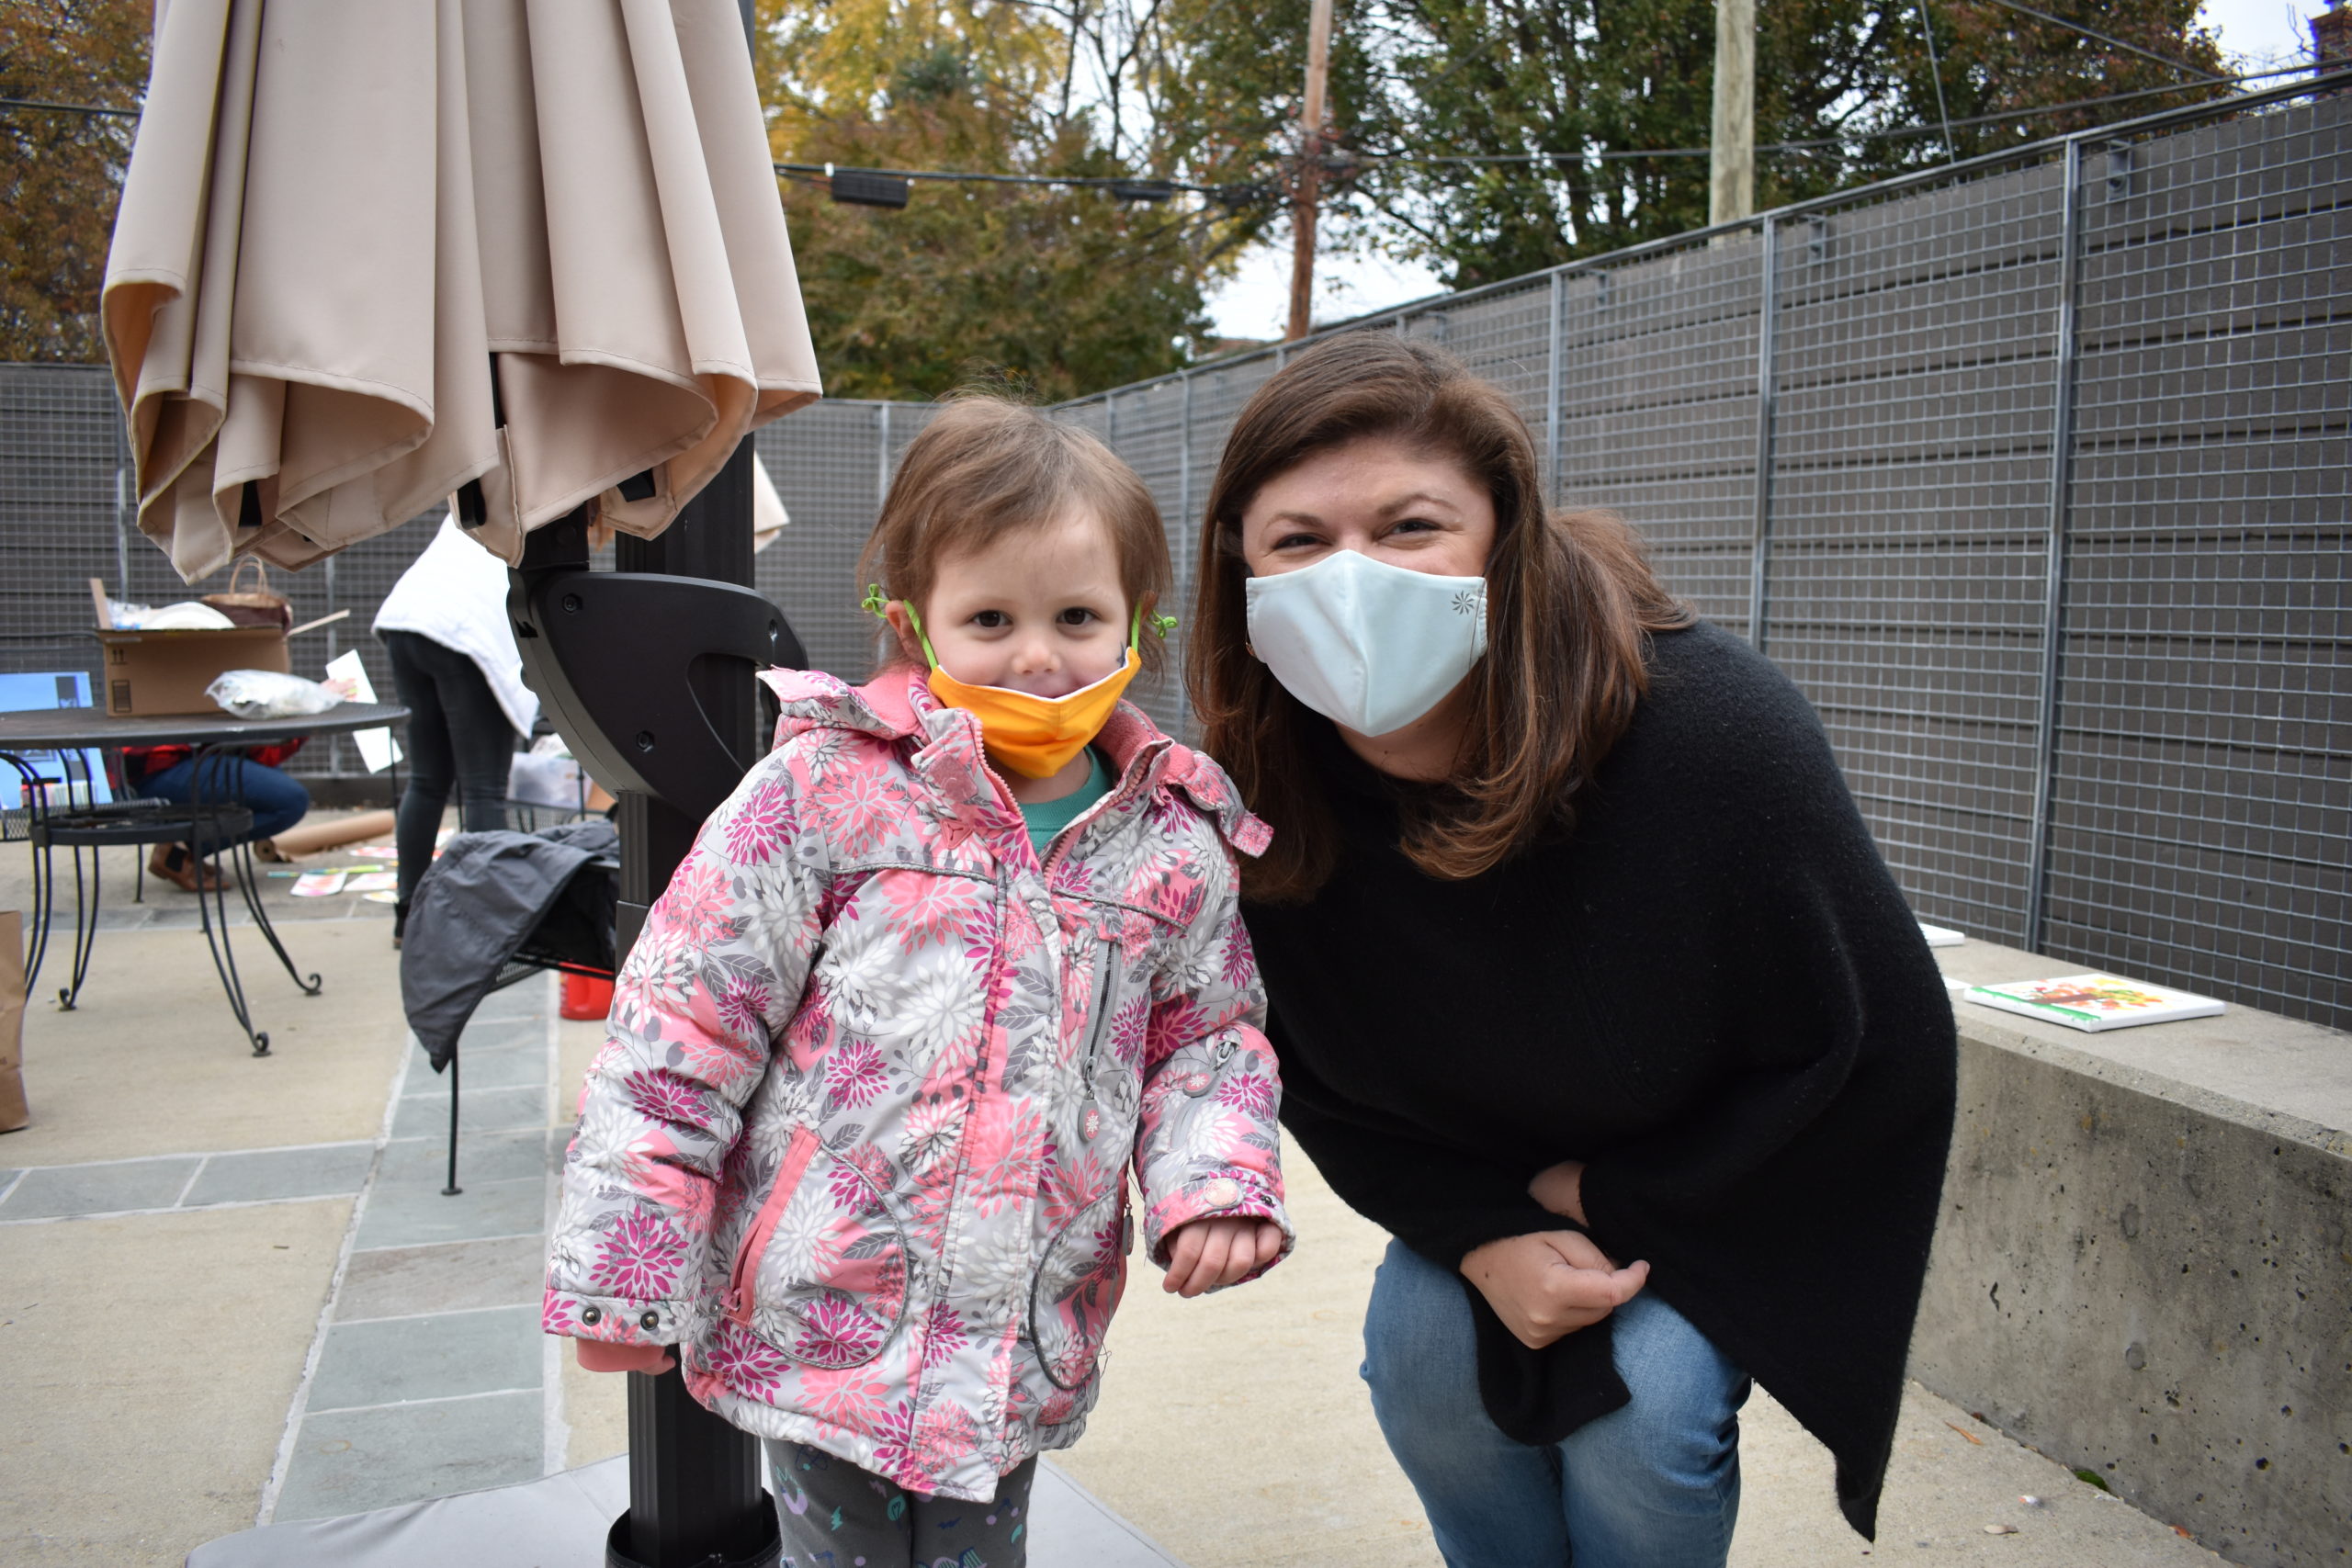 A girl standing next to a woman both are wearing cloth face masks